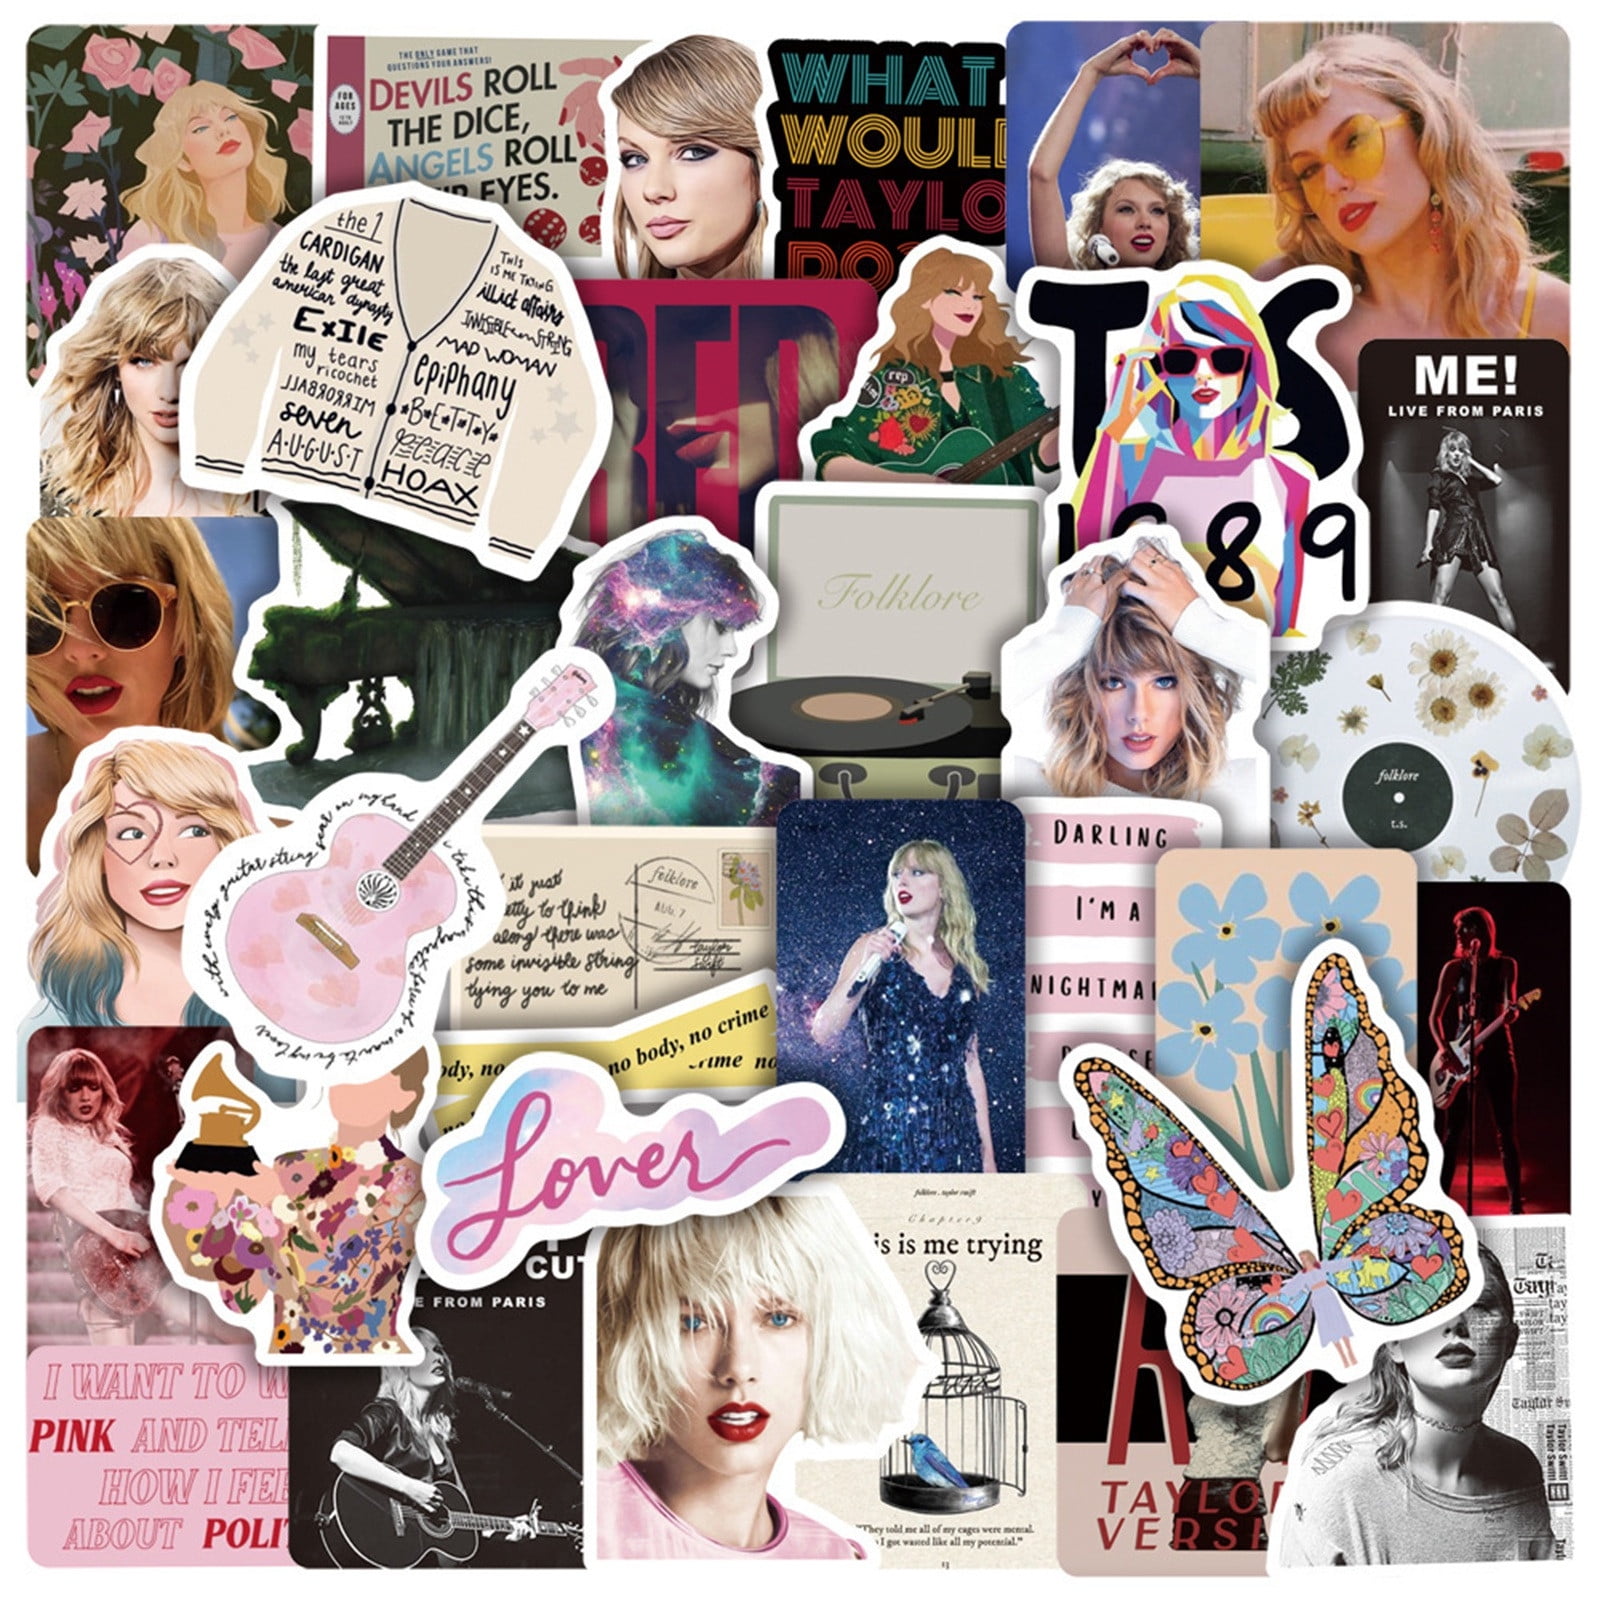 Taylor Swift Merch  50pcs Swift Ablum Stickers for Adult,Taylor Singer  Albums Stickers,Waterproof Vinyl Sticker for Water Bottles,Laptops,Music  Fans,Party Favors Party Decor,Taylor Swift Gifts 